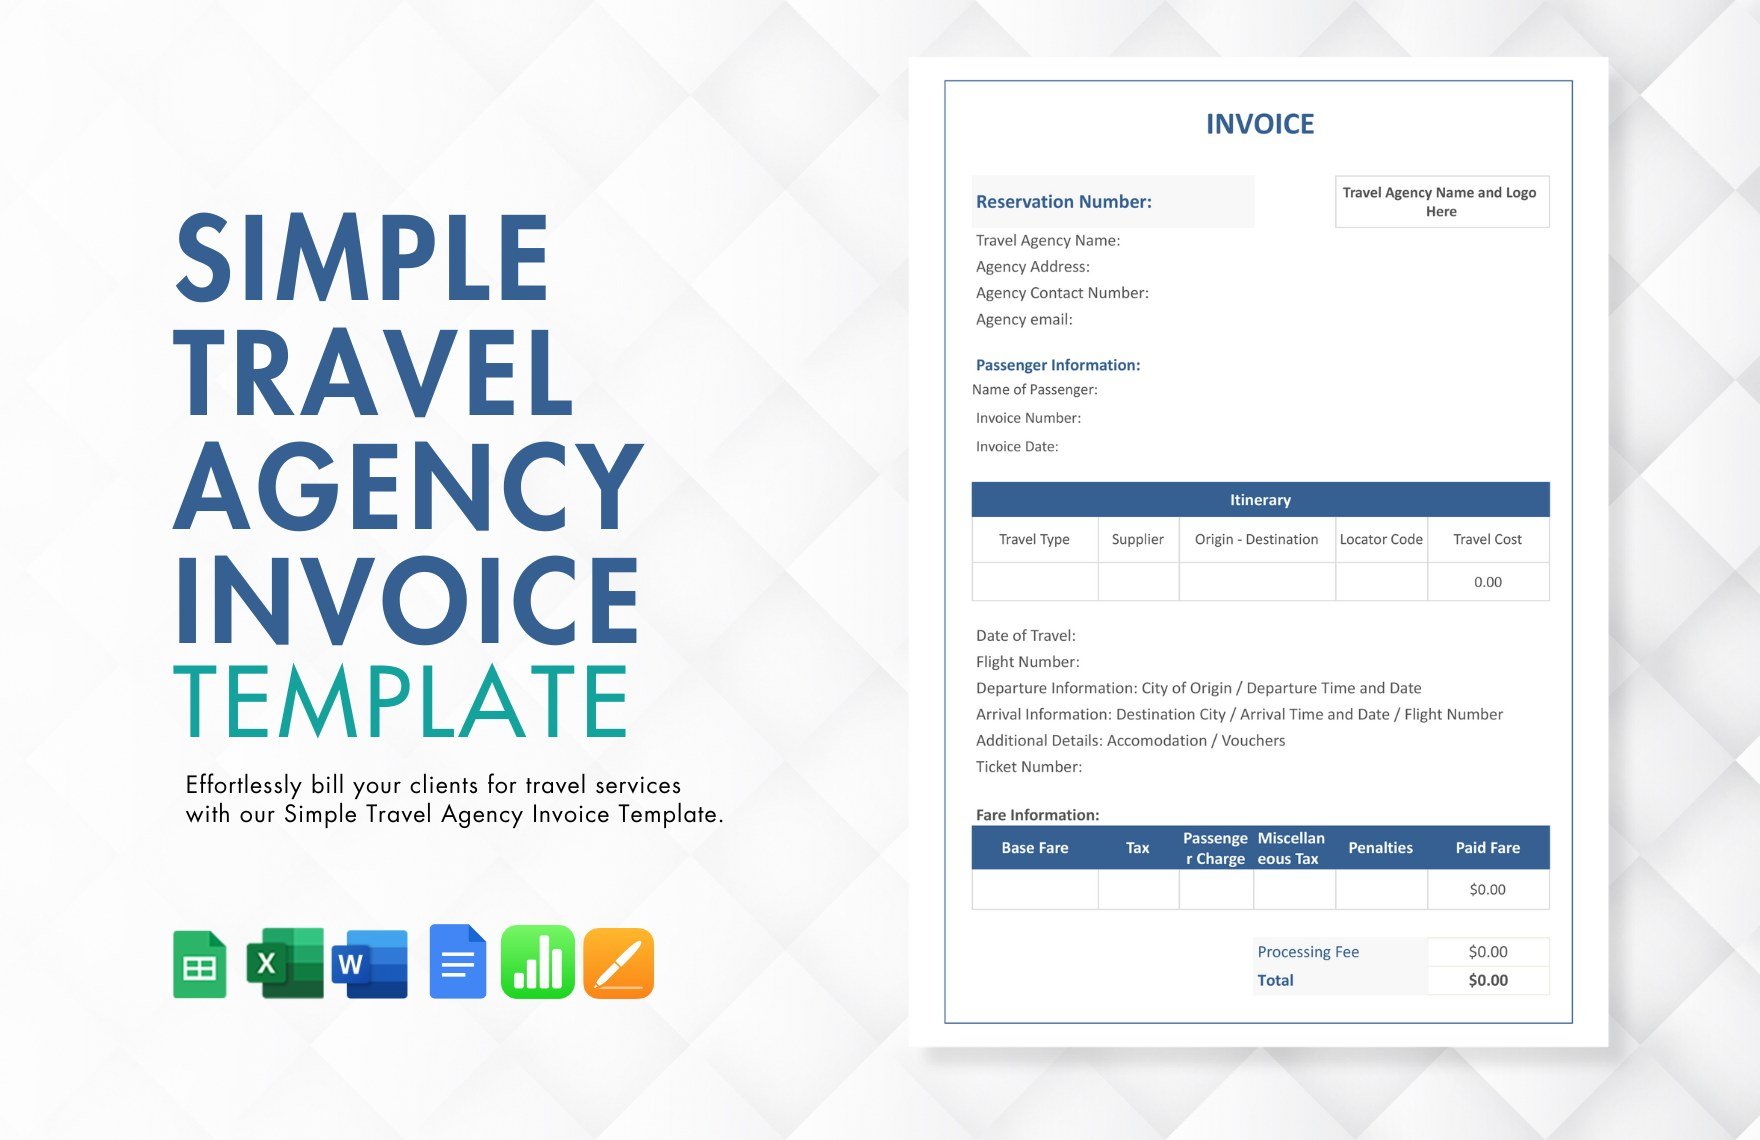 Simple Travel Agency Invoice Template